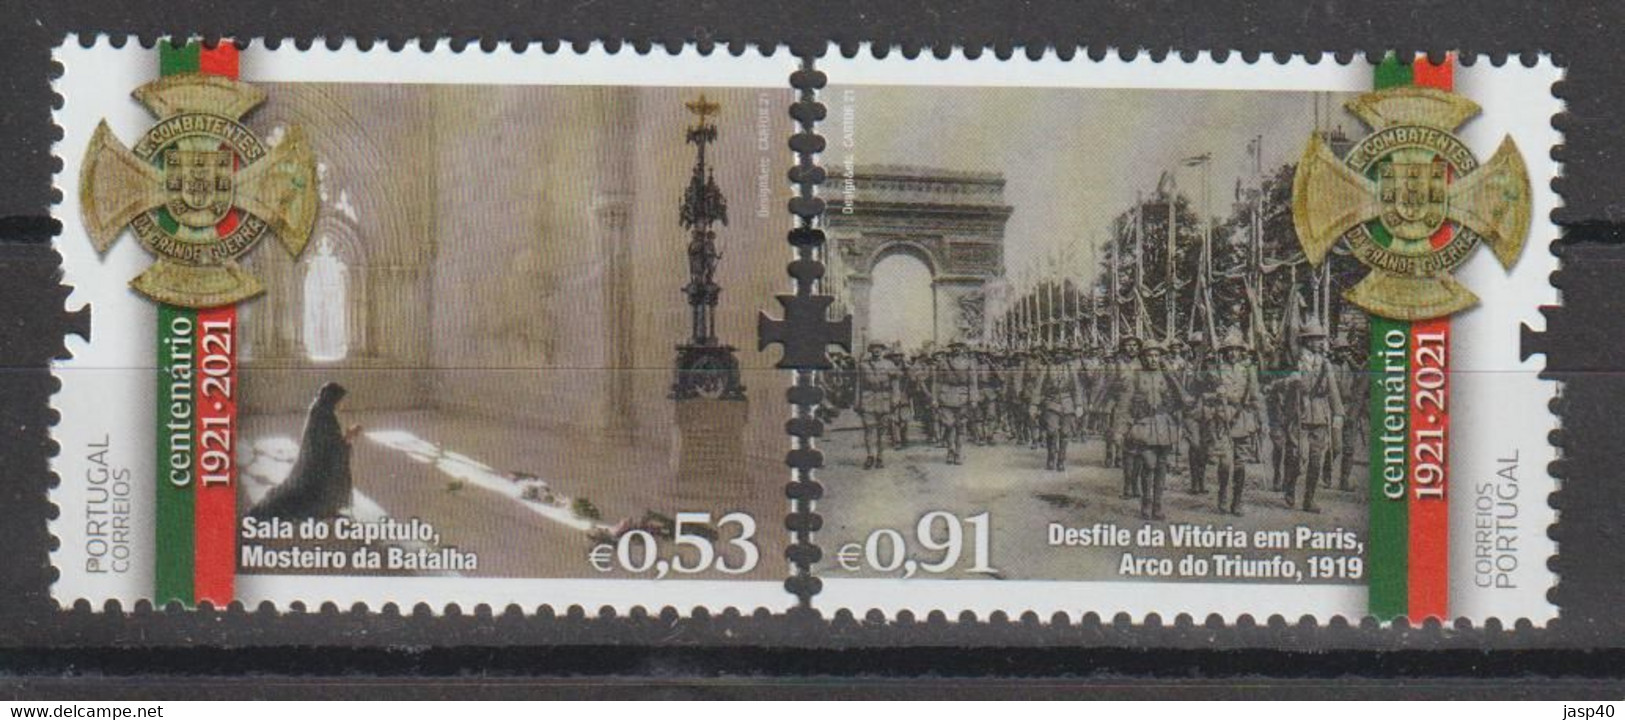 PORTUGAL - LIGA DOS COMBATENTES - Used Stamps